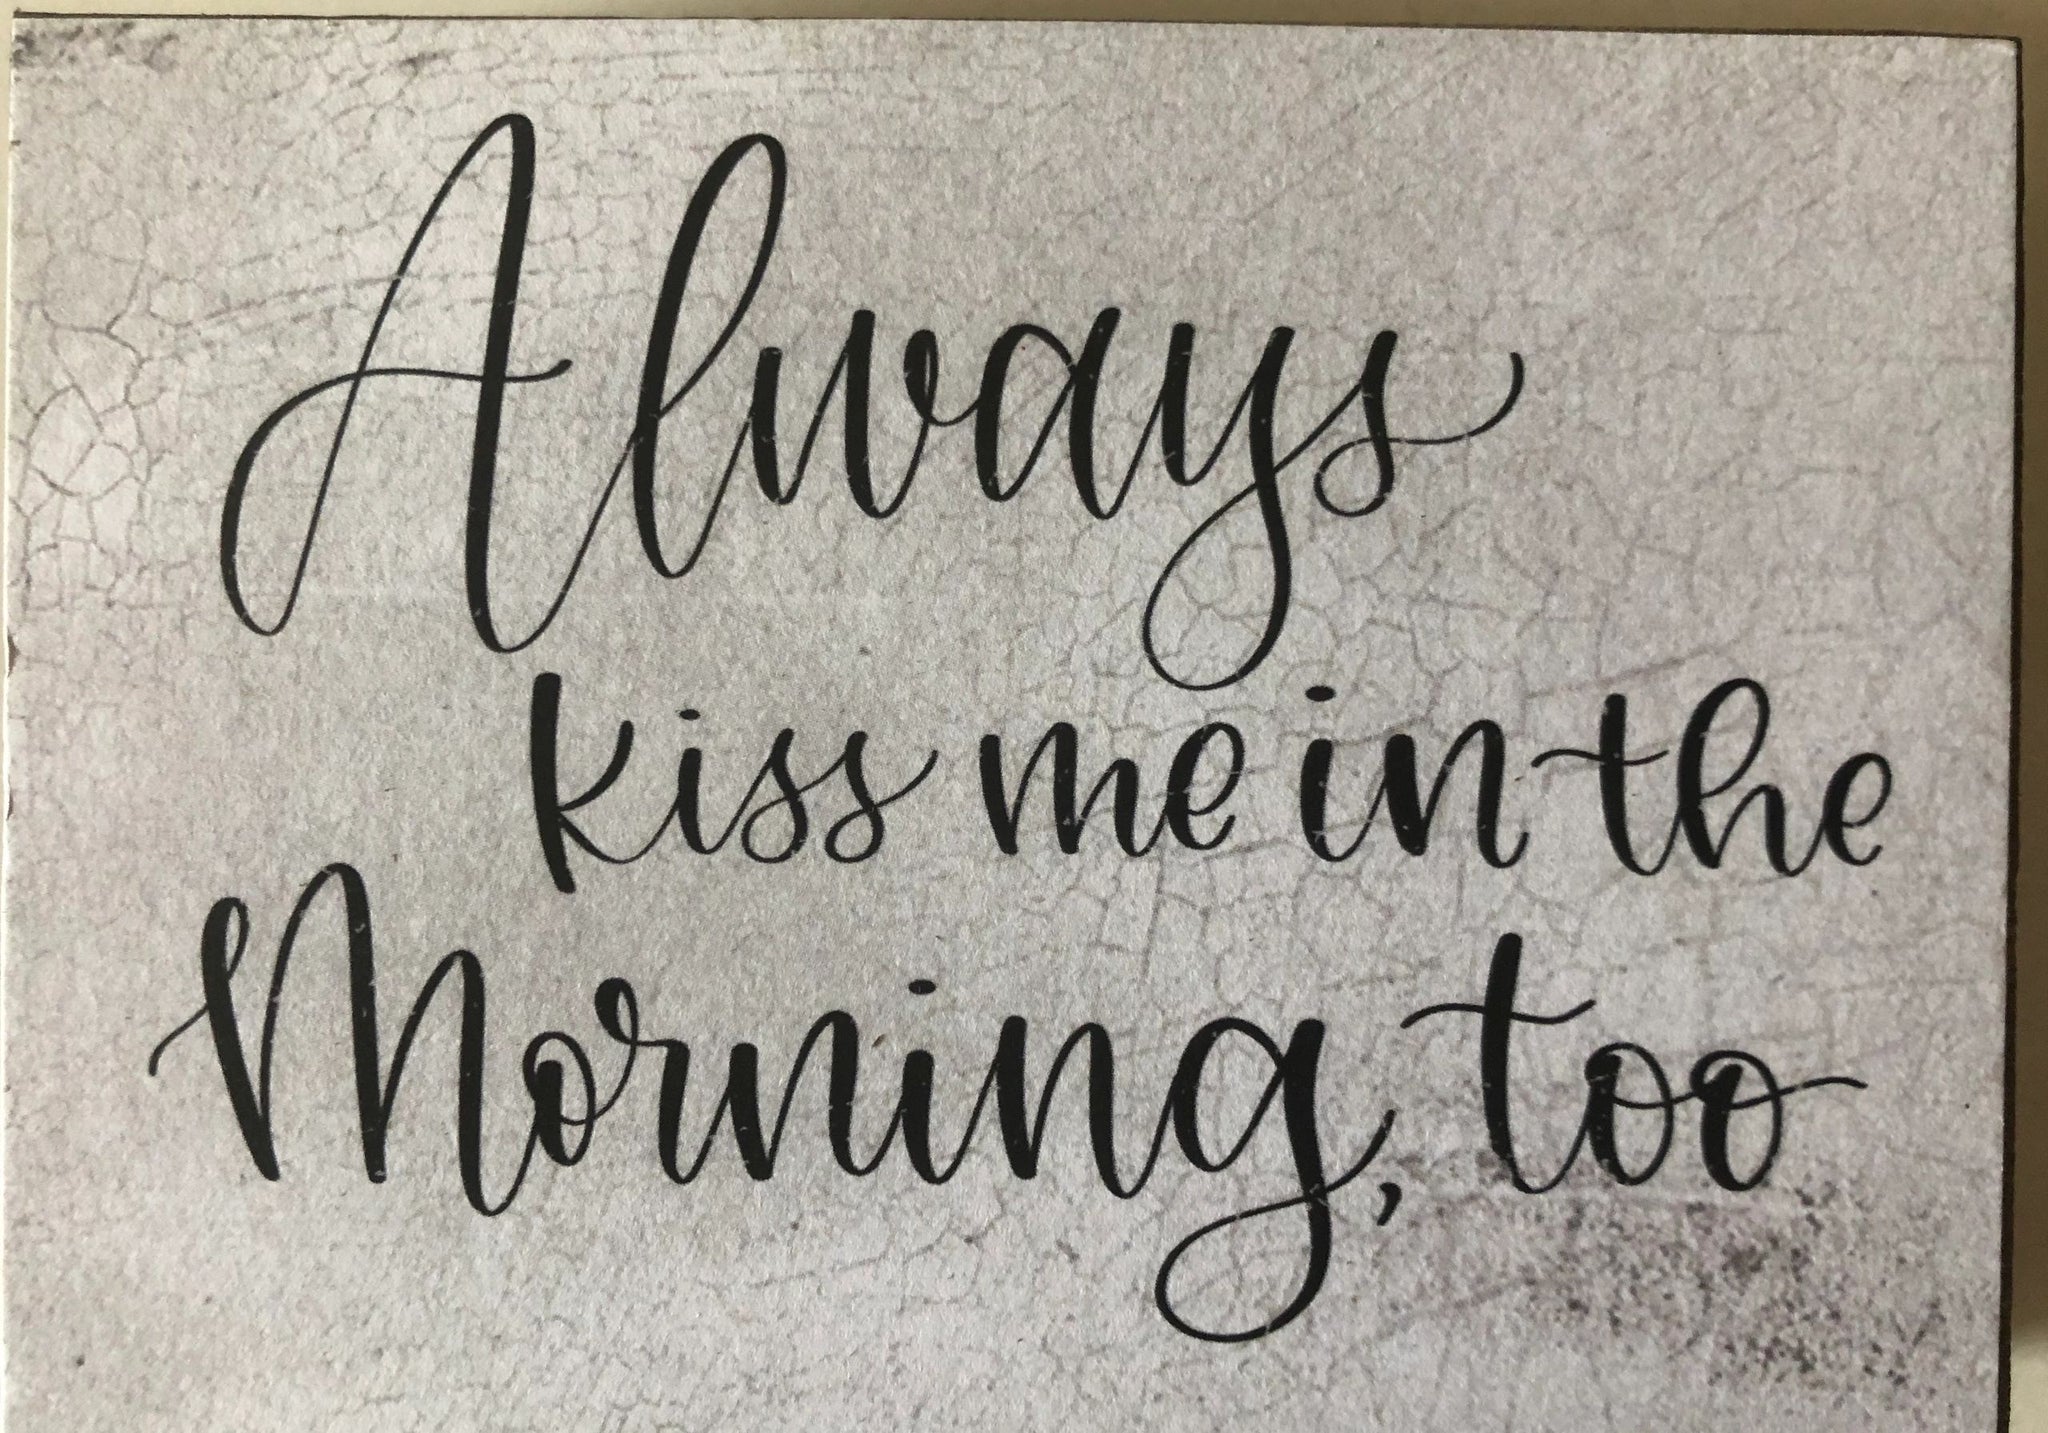 Always Kiss Me in the Morning too 3 x 4 block sign